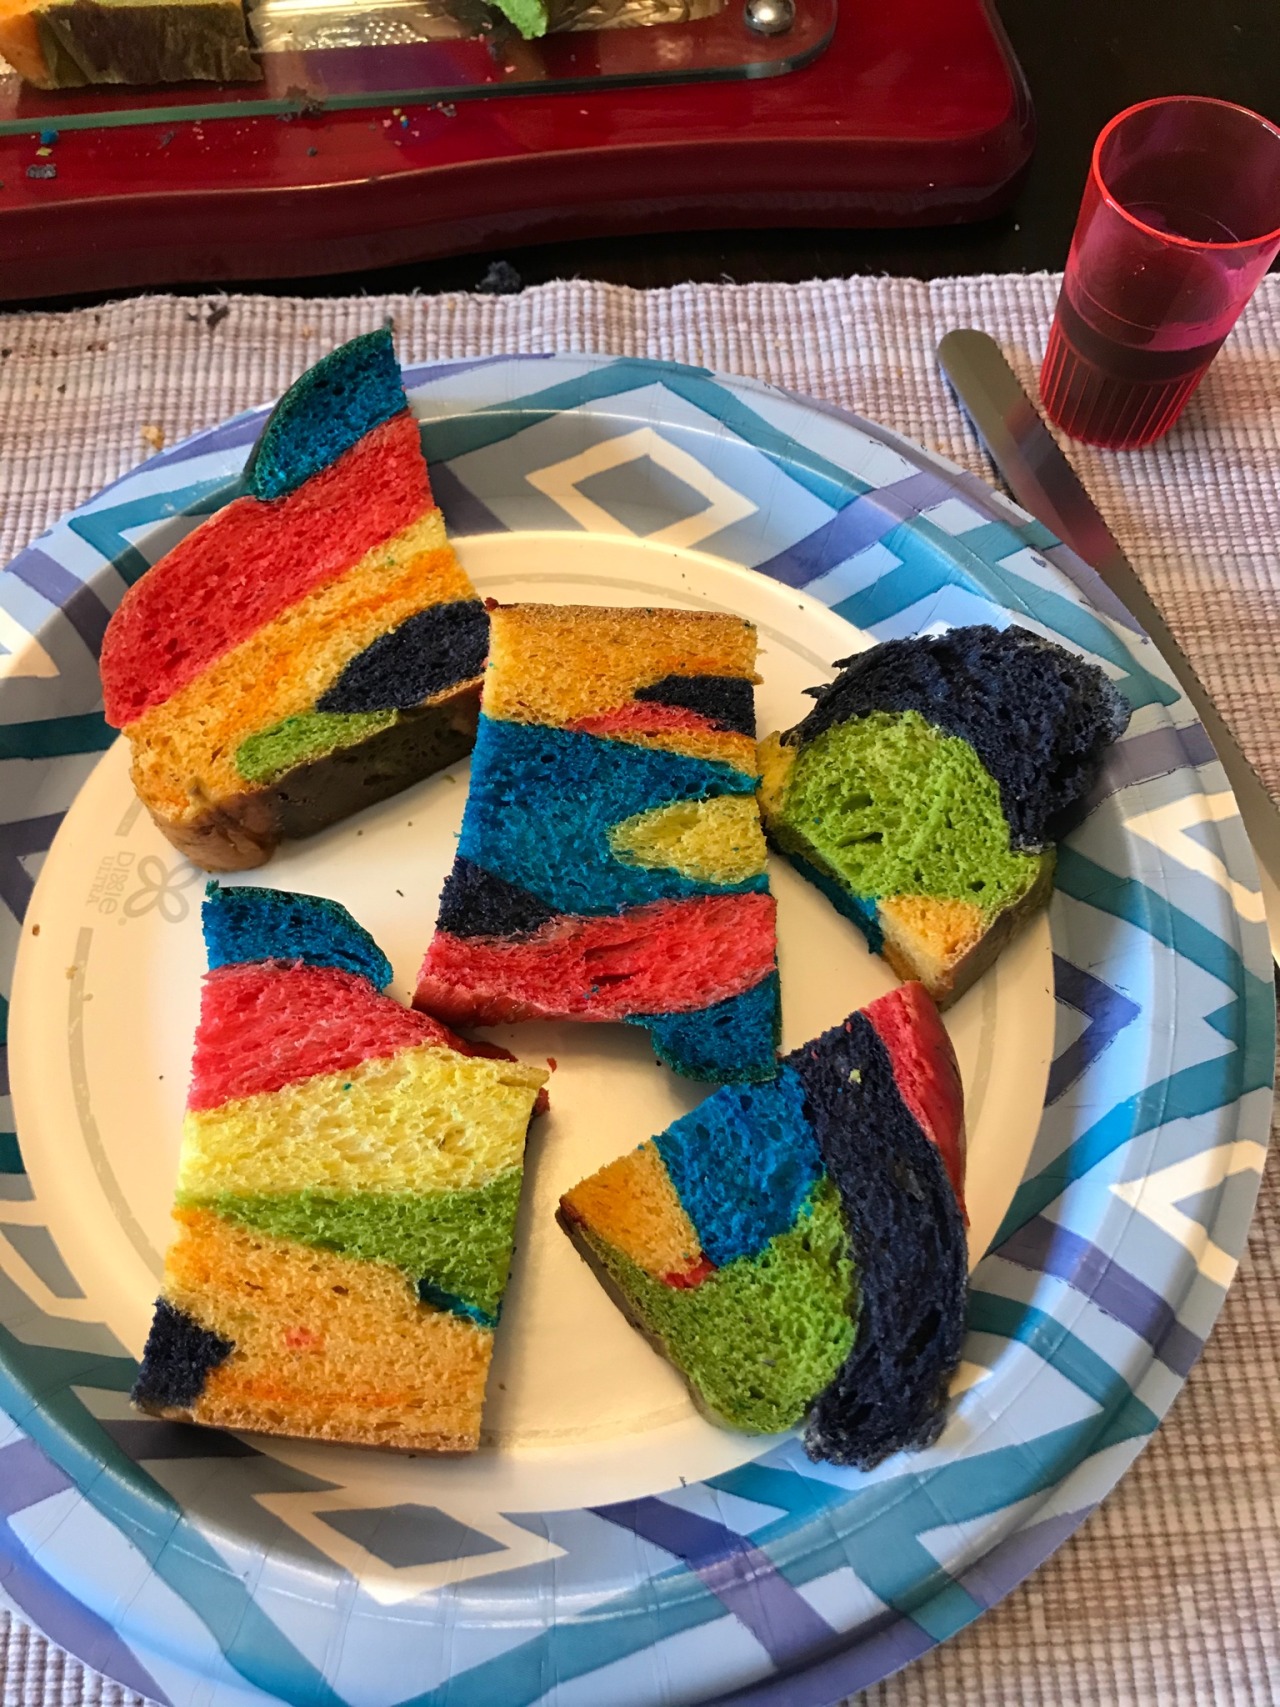 A colorful challah cut into pieces